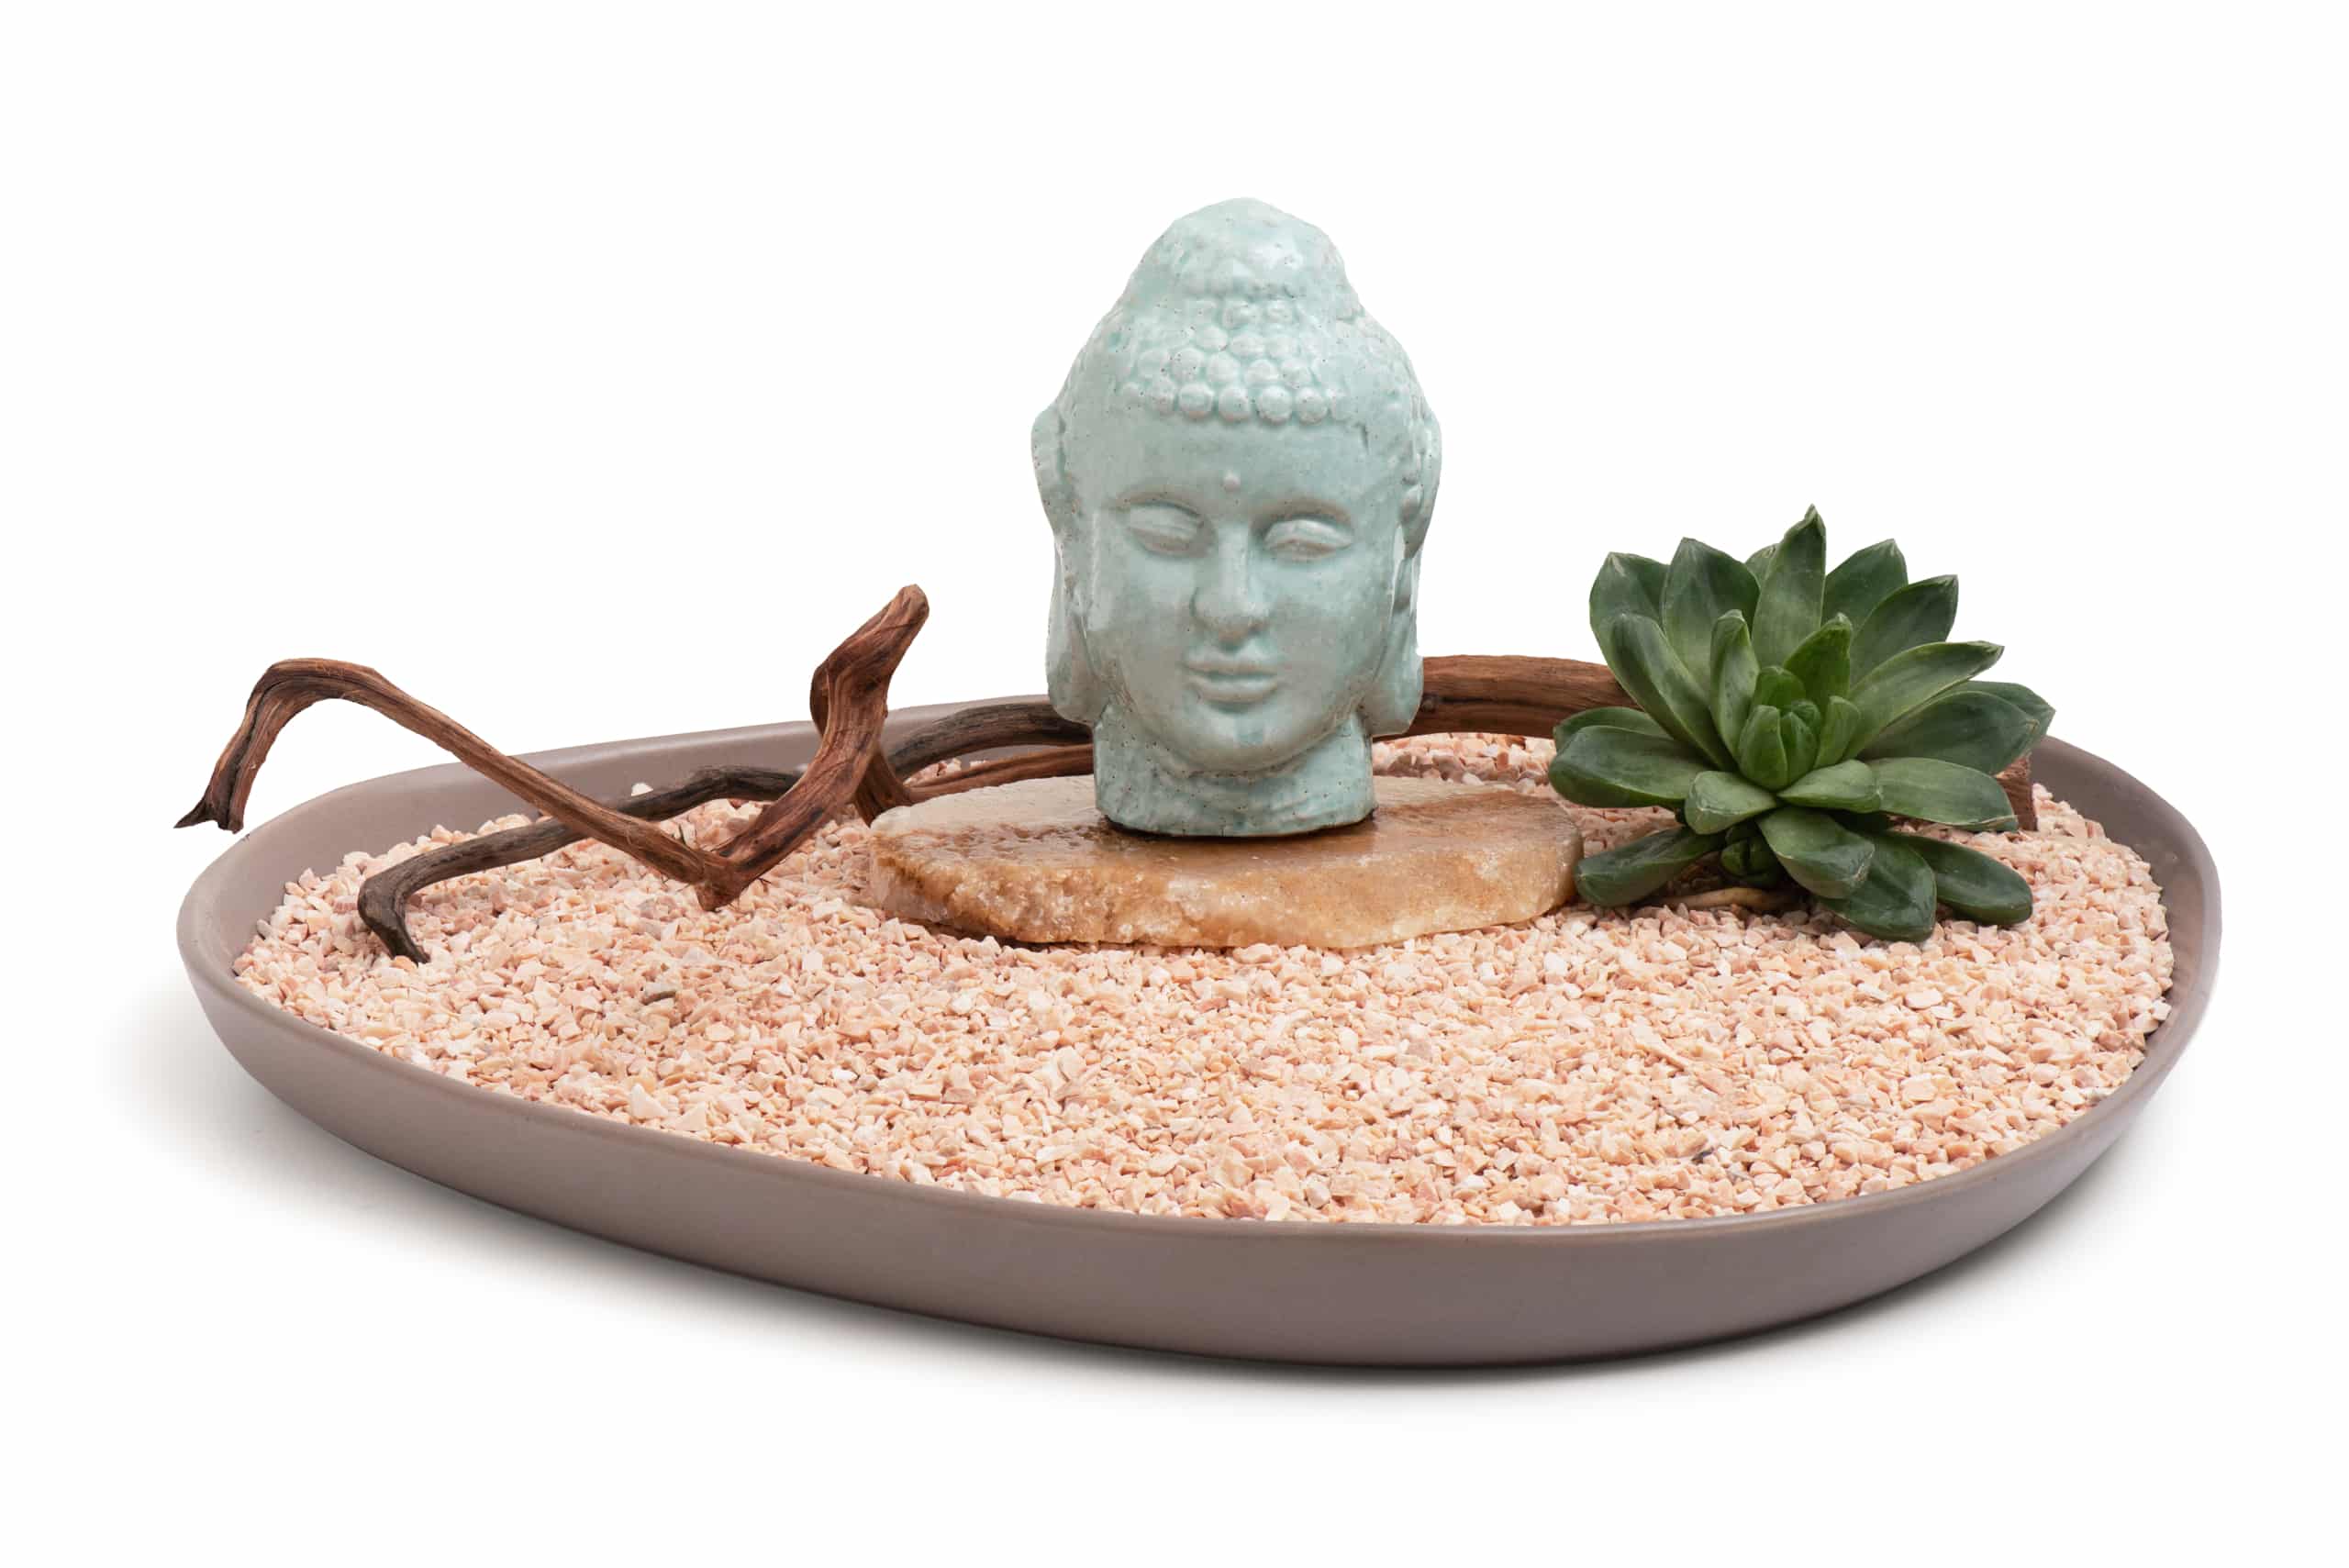 Garden tray with old buddha statue isolated on white background with clipping path.